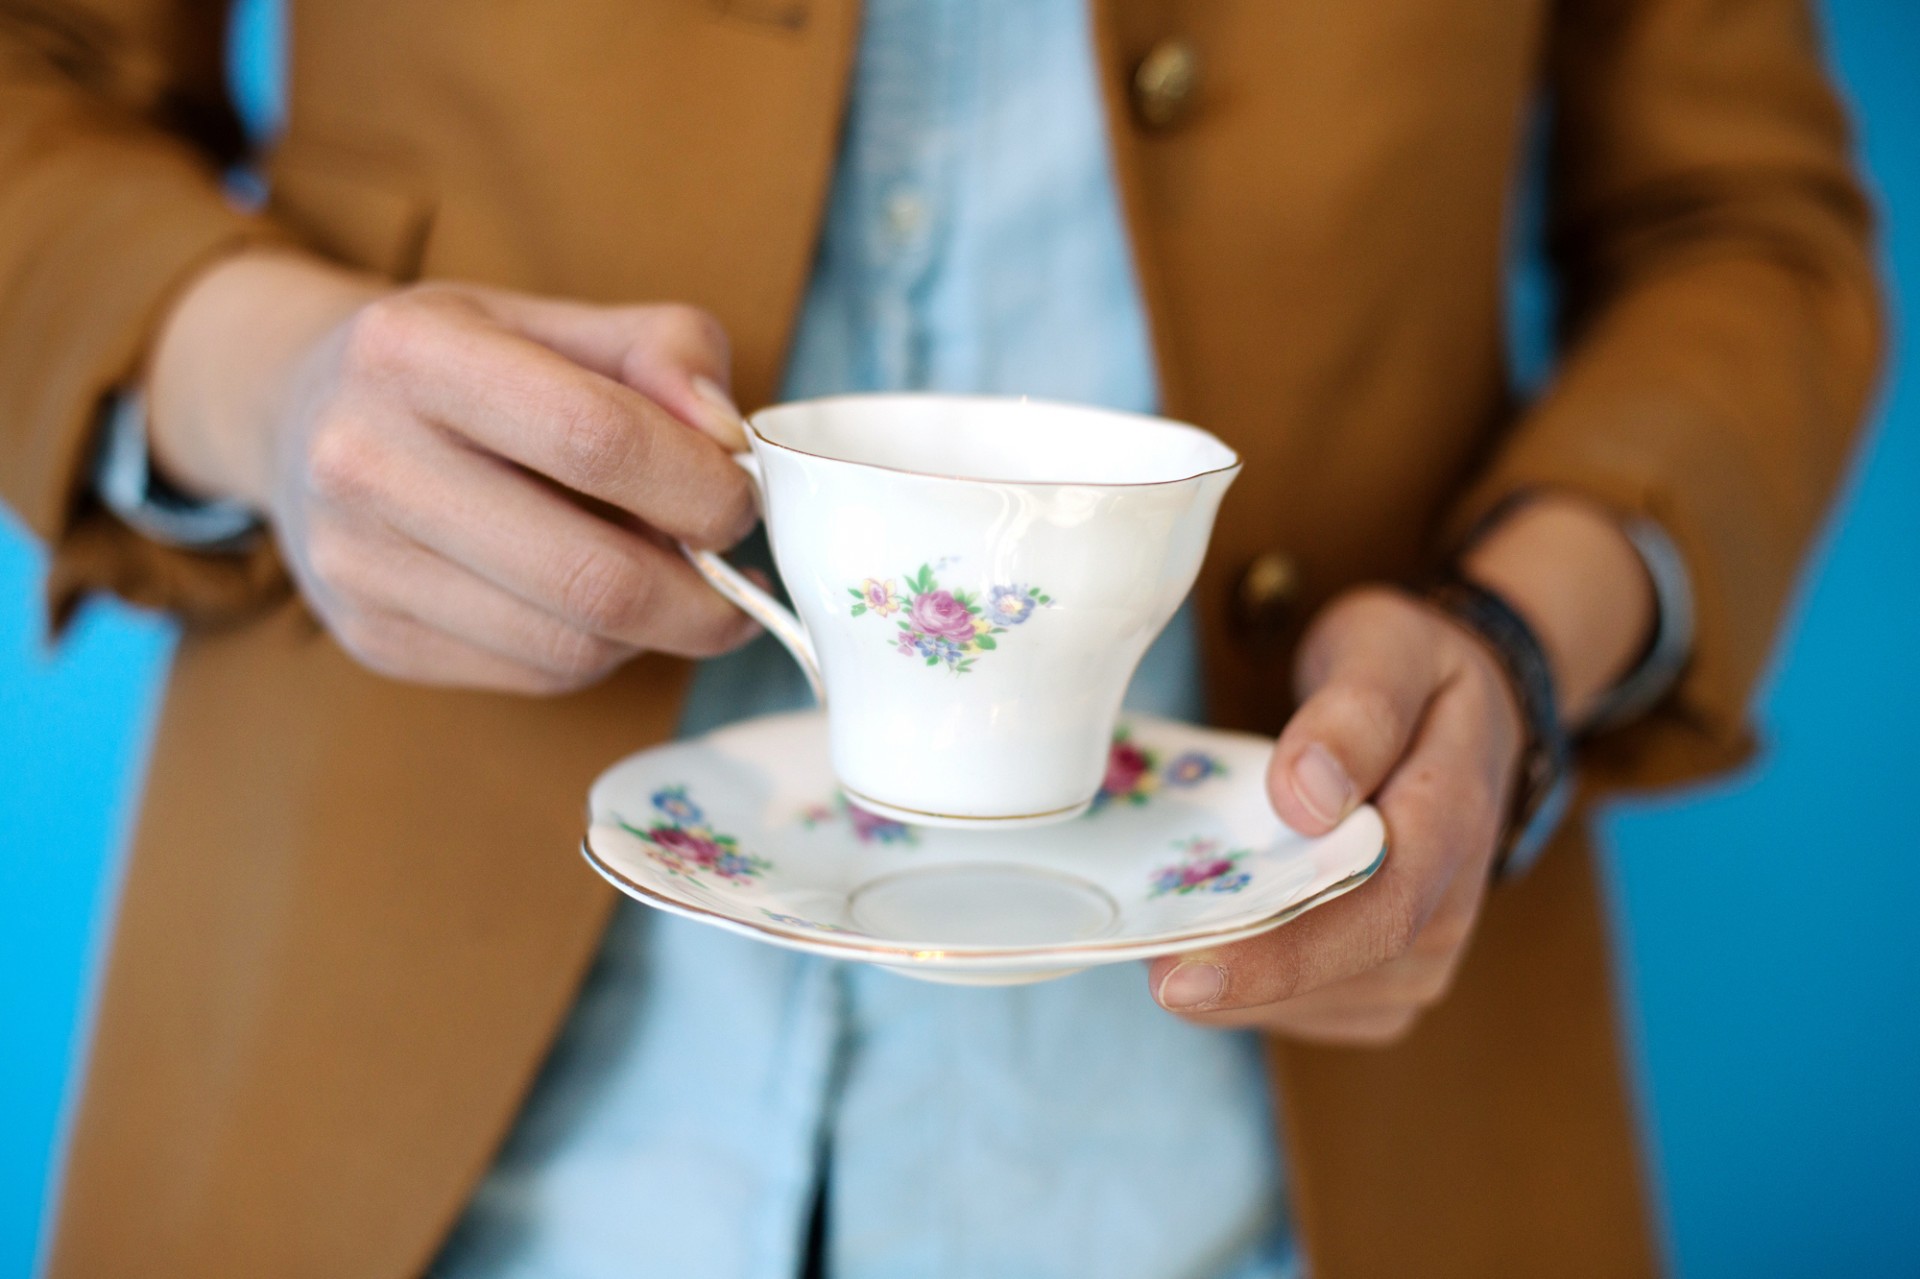 The perfect cup of tea, prepared by Alison Bruzek. Photo: Meredith Rizzo/NPR